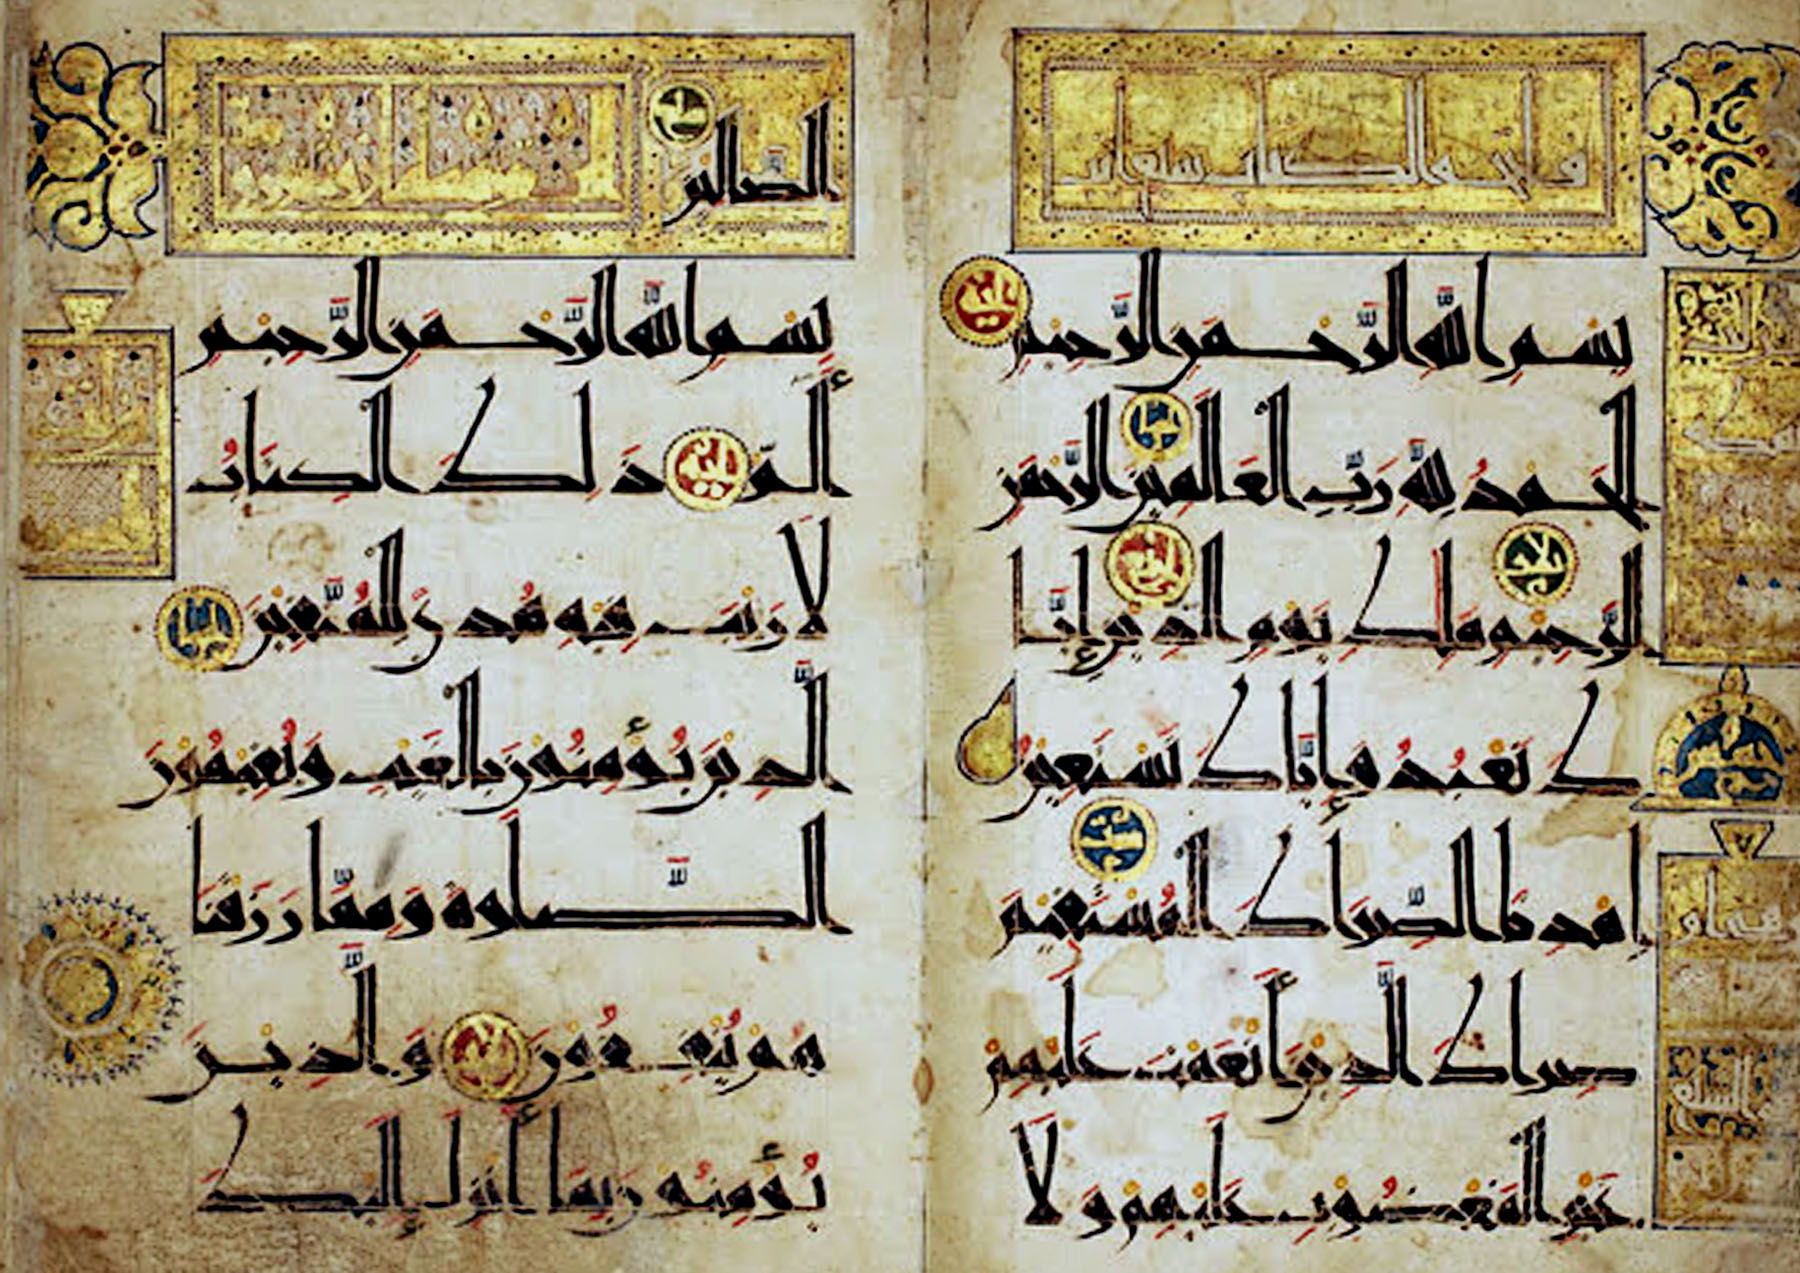 An image of the Later 11th century Kufic calligraphy of Surah Al-Fatiha